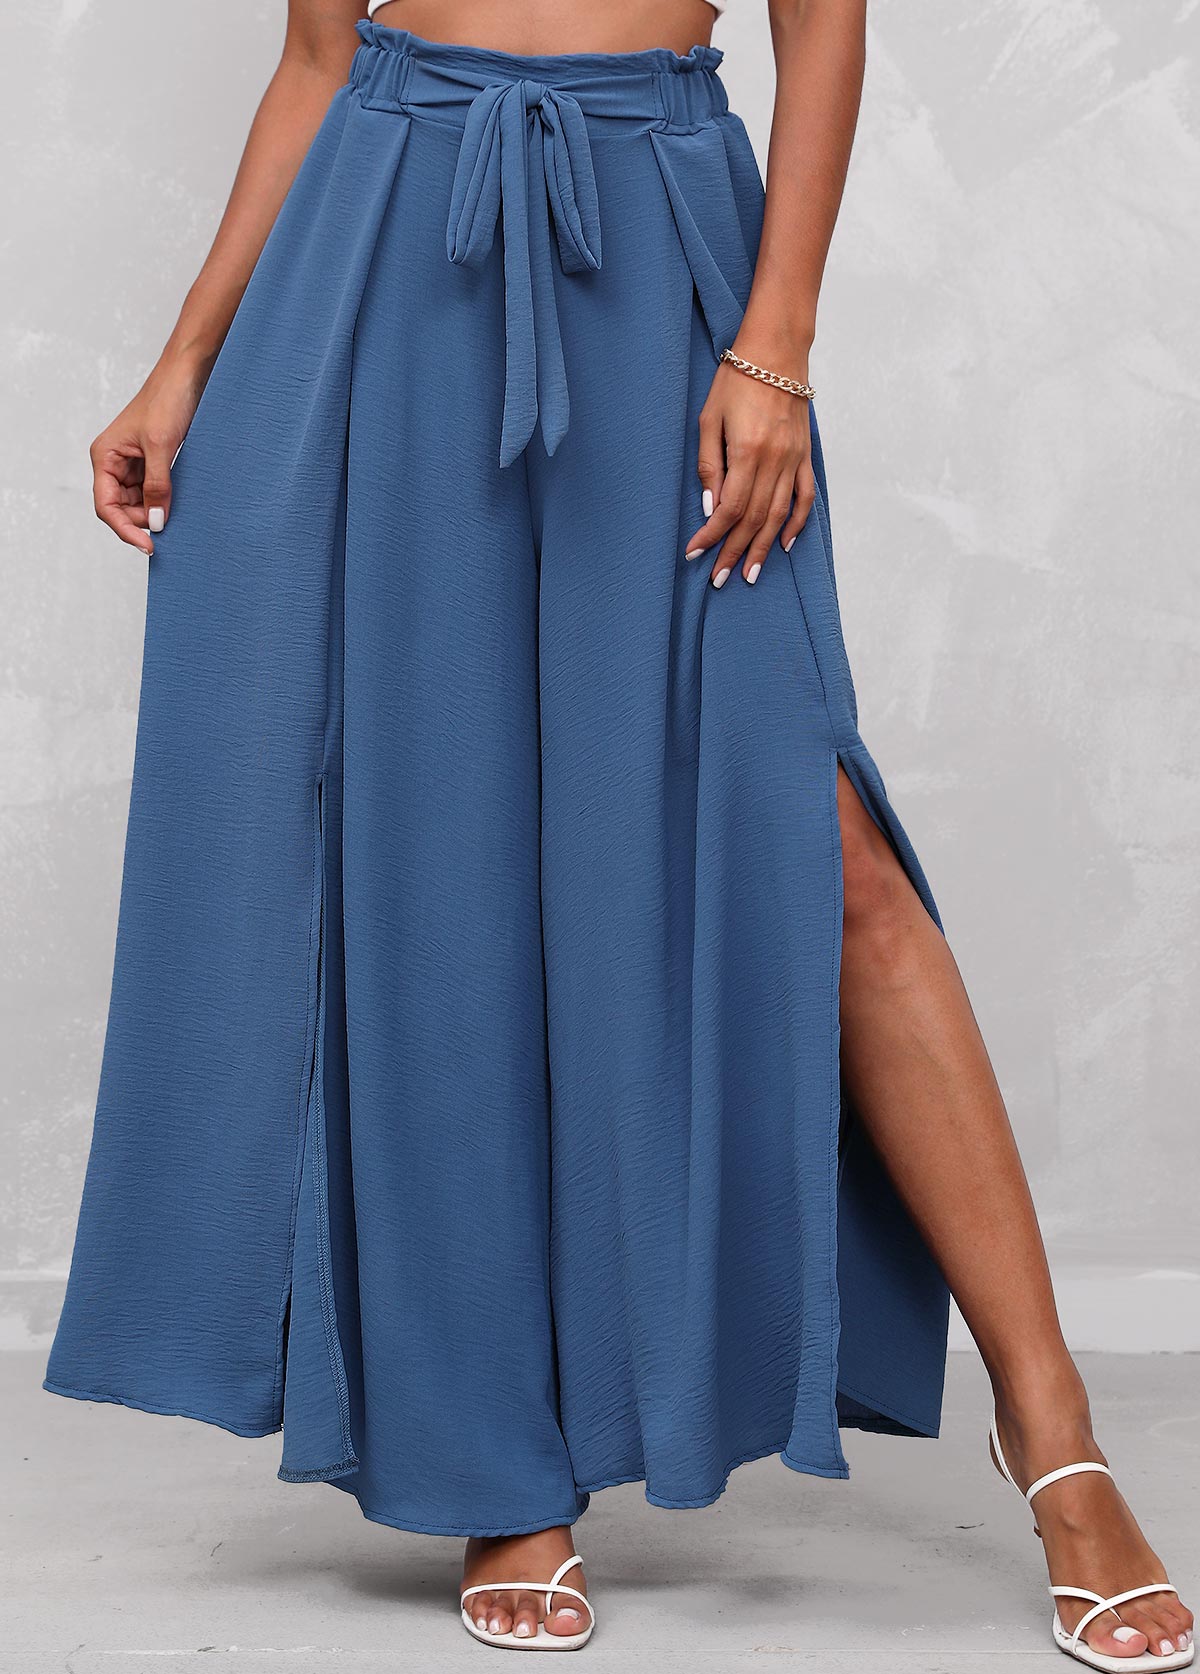 Blue High Waisted Side Slit Tie Front Pants